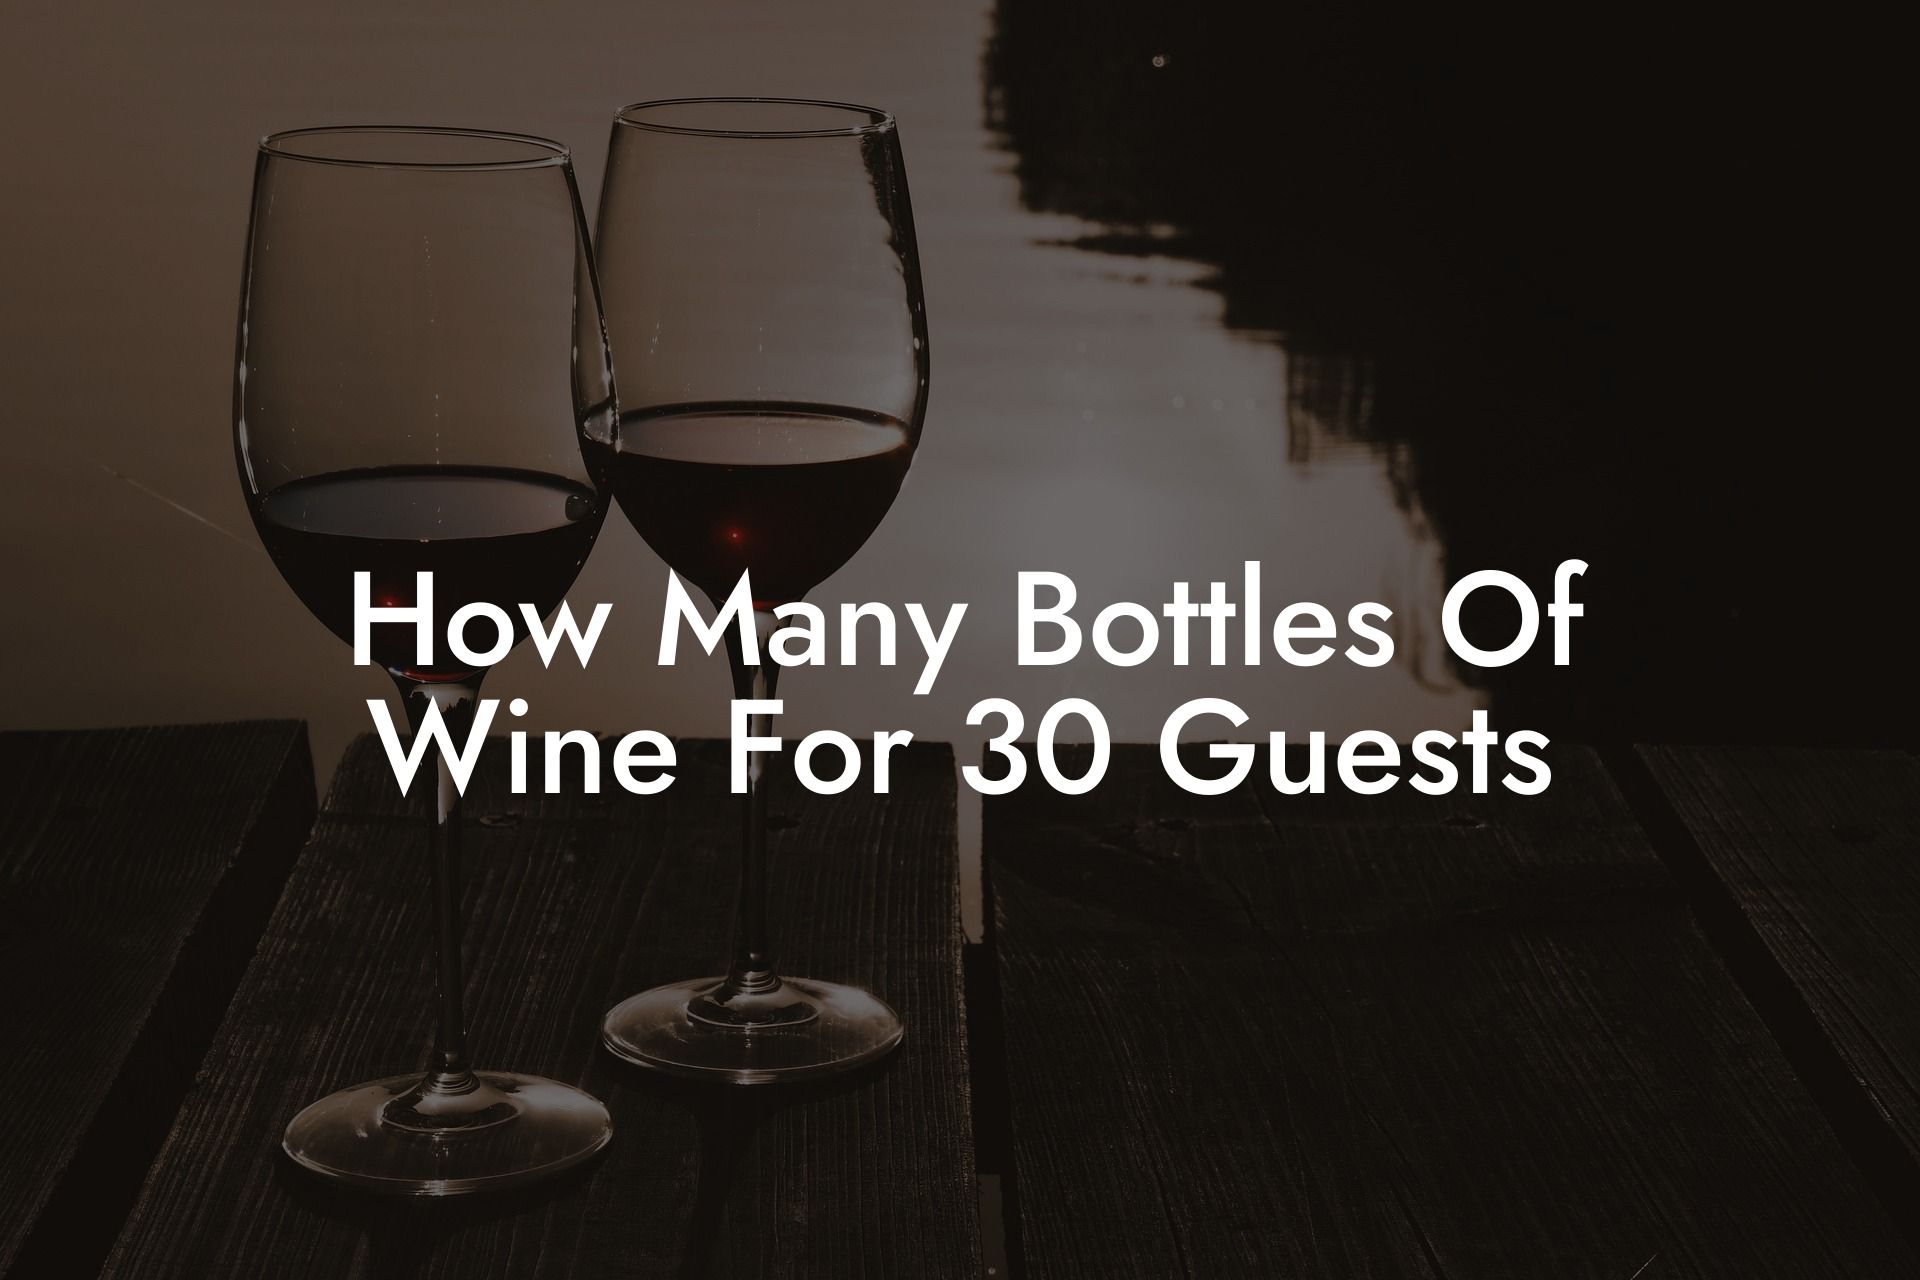 How Many Bottles Of Wine For 30 Guests